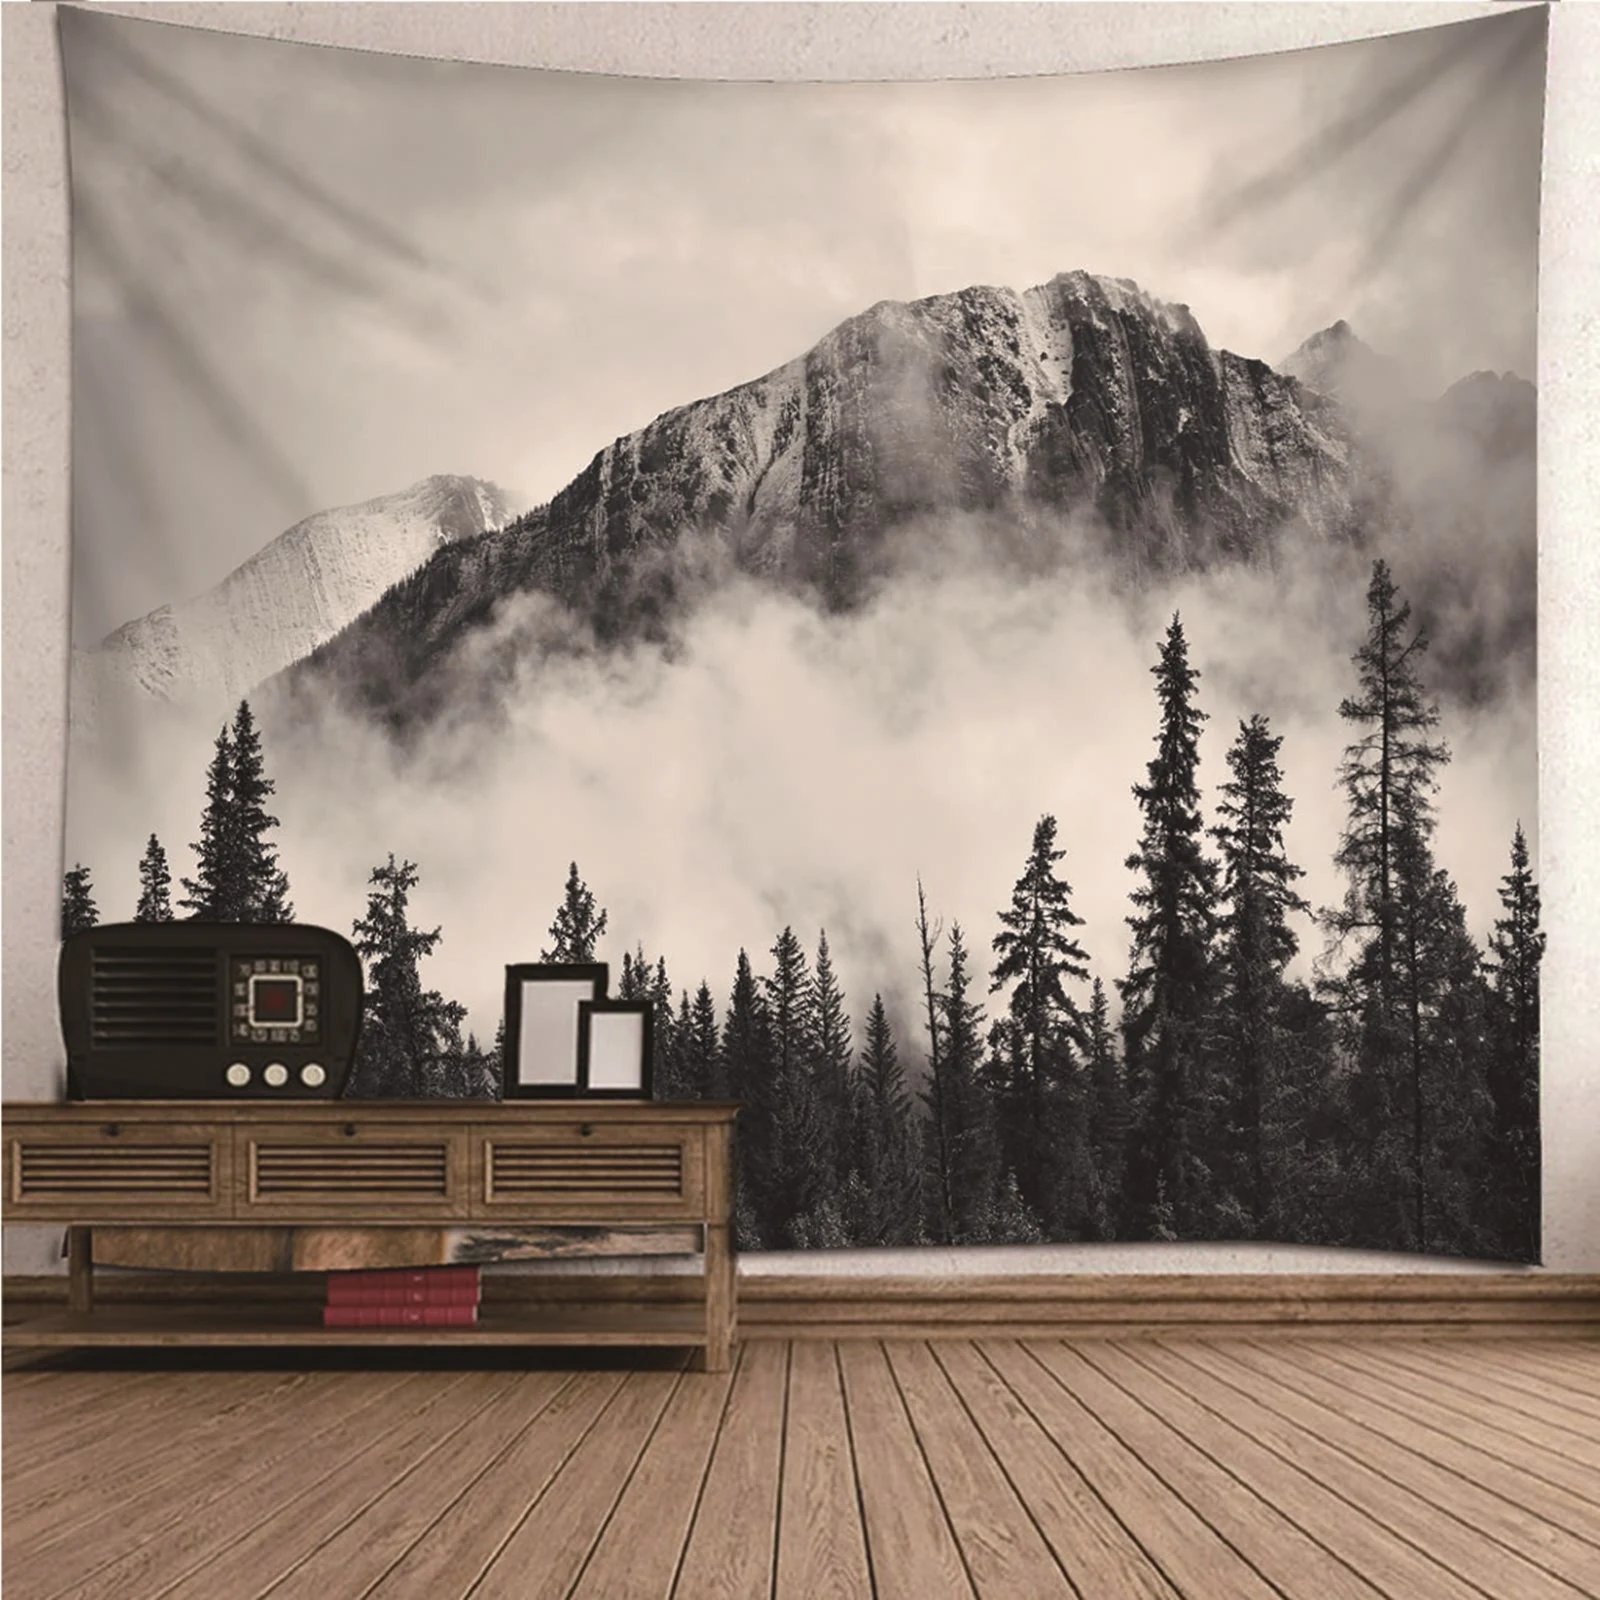 

Tapestries Large Tapestry Art Small natural scenery Mist In The Mountains Wall Hanging Blanket Dorm Art Decor Covering